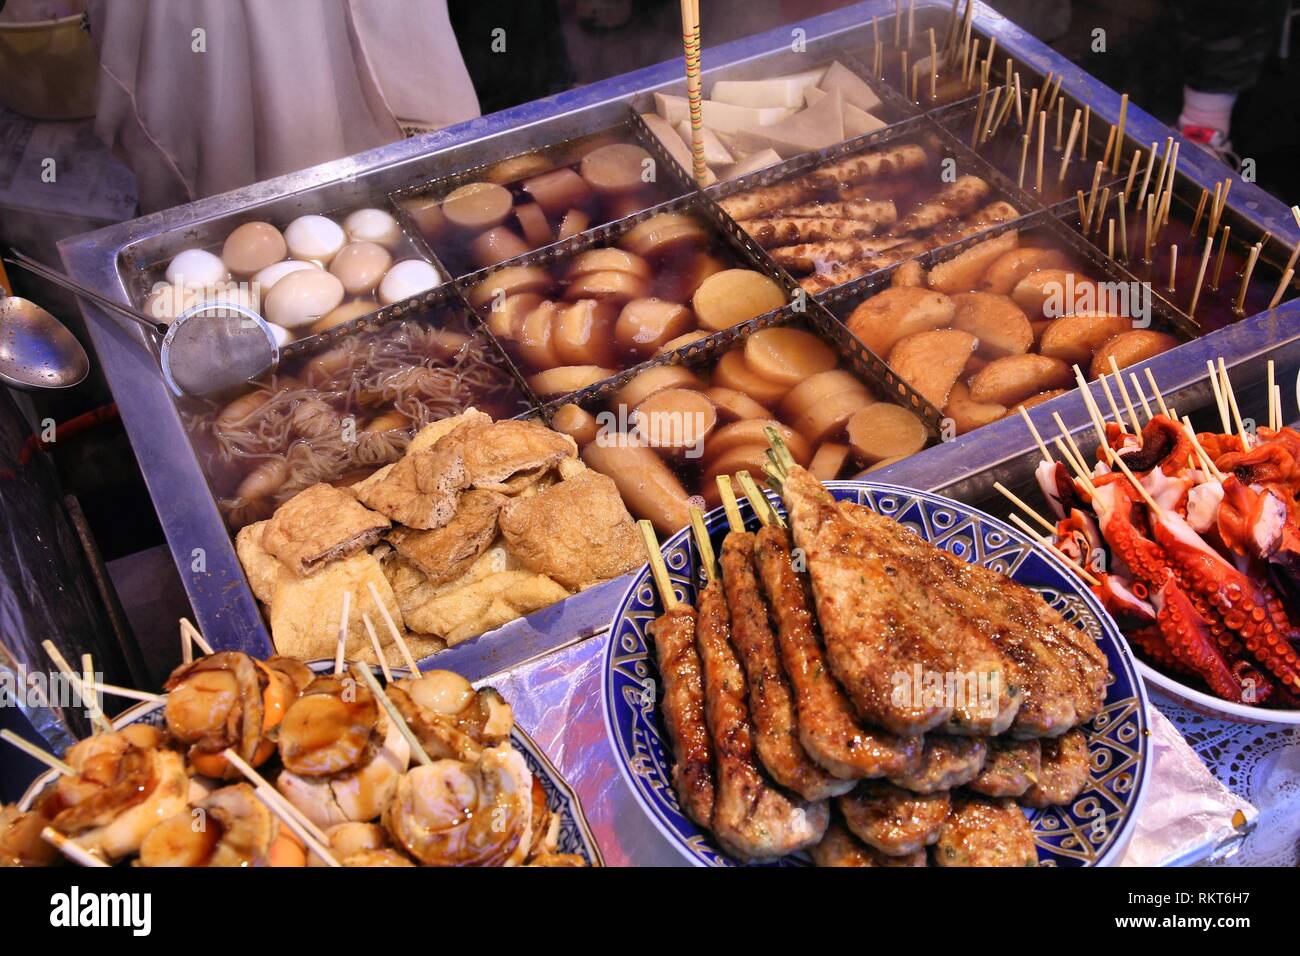 Japanese cuisine - fried chicken, squid, eggs, dumplings and other food Stock Photo